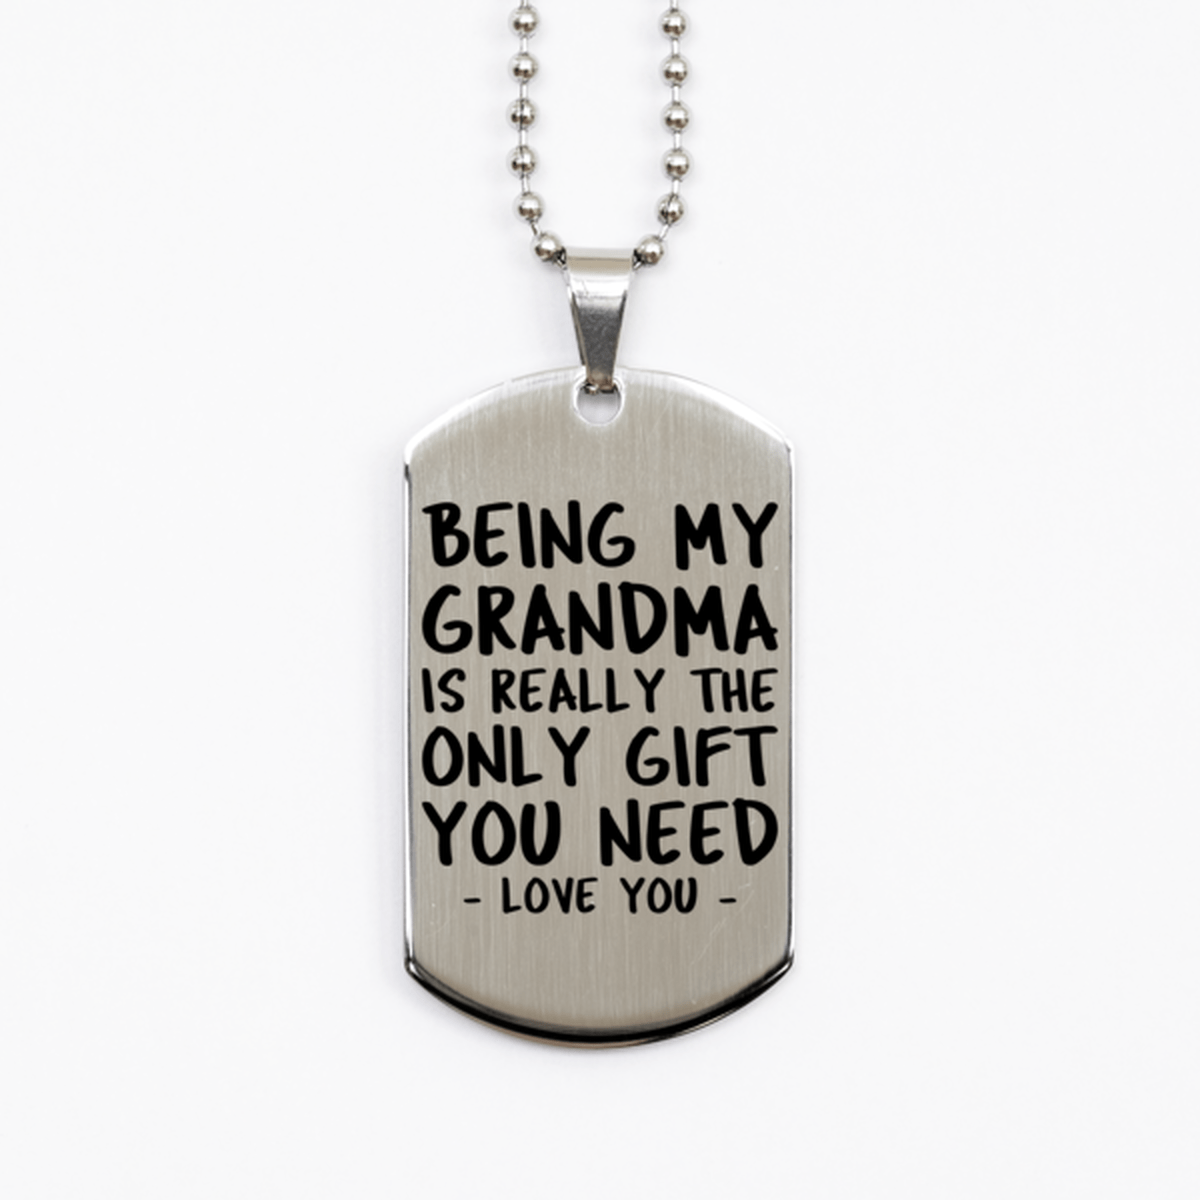 Funny Grandma Silver Dog Tag Necklace, Being My Grandma Is Really the Only Gift You Need, Best Birthday Gifts for Grandma